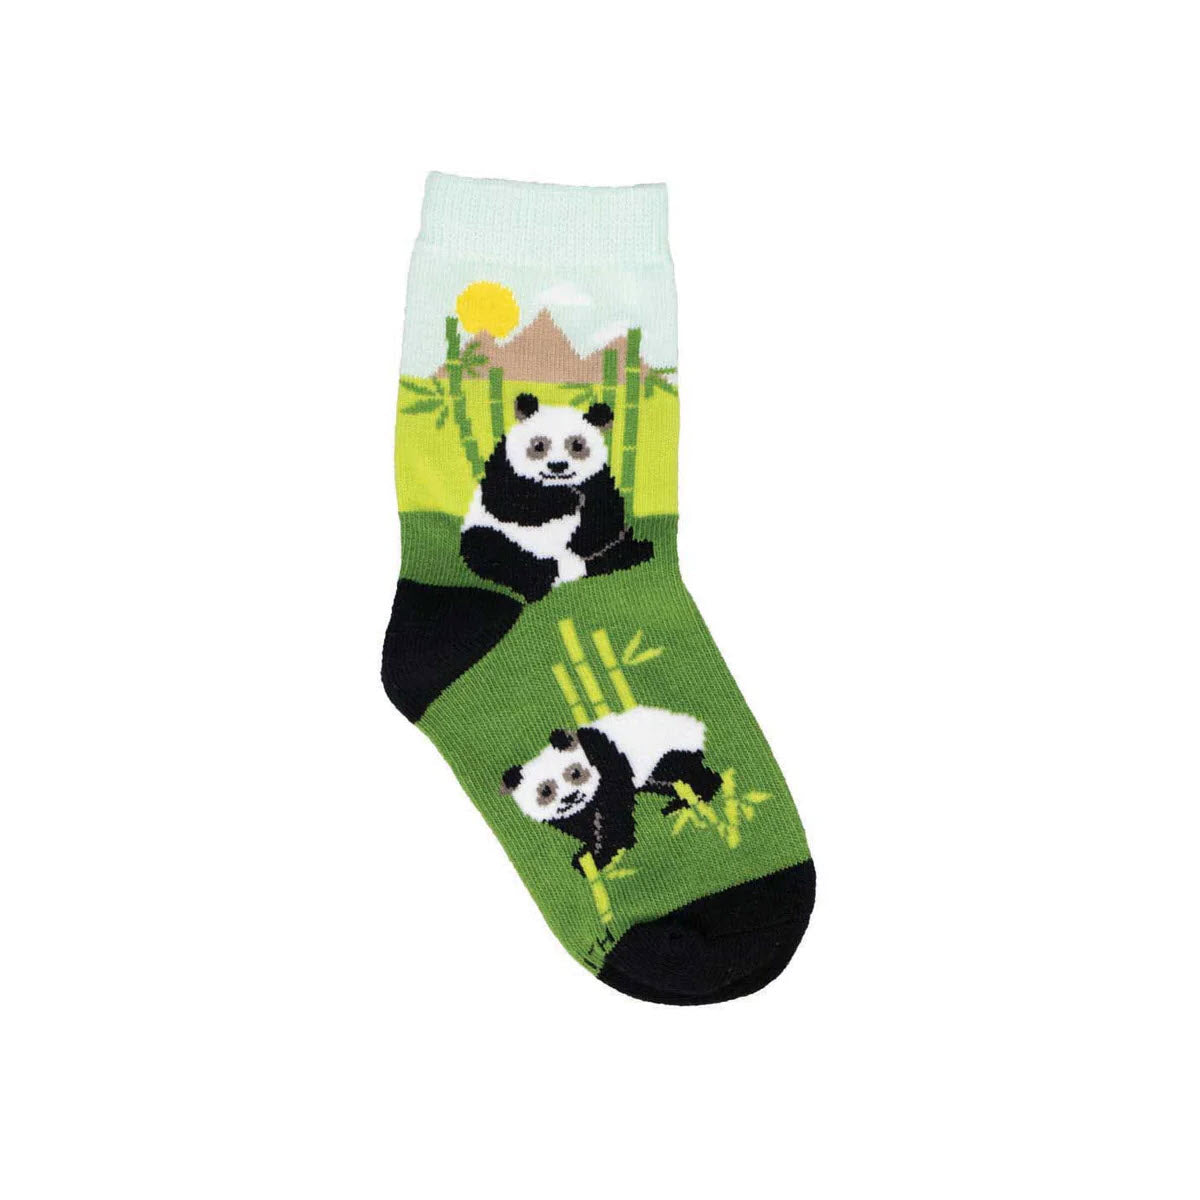 A pair of SOCKSMITH HAPPY PANDAS CREW SOCKS MINT - KIDS for kids with a graphic design featuring two pandas, one sitting and one lying down, against a green and yellow background with bamboo and a sun.